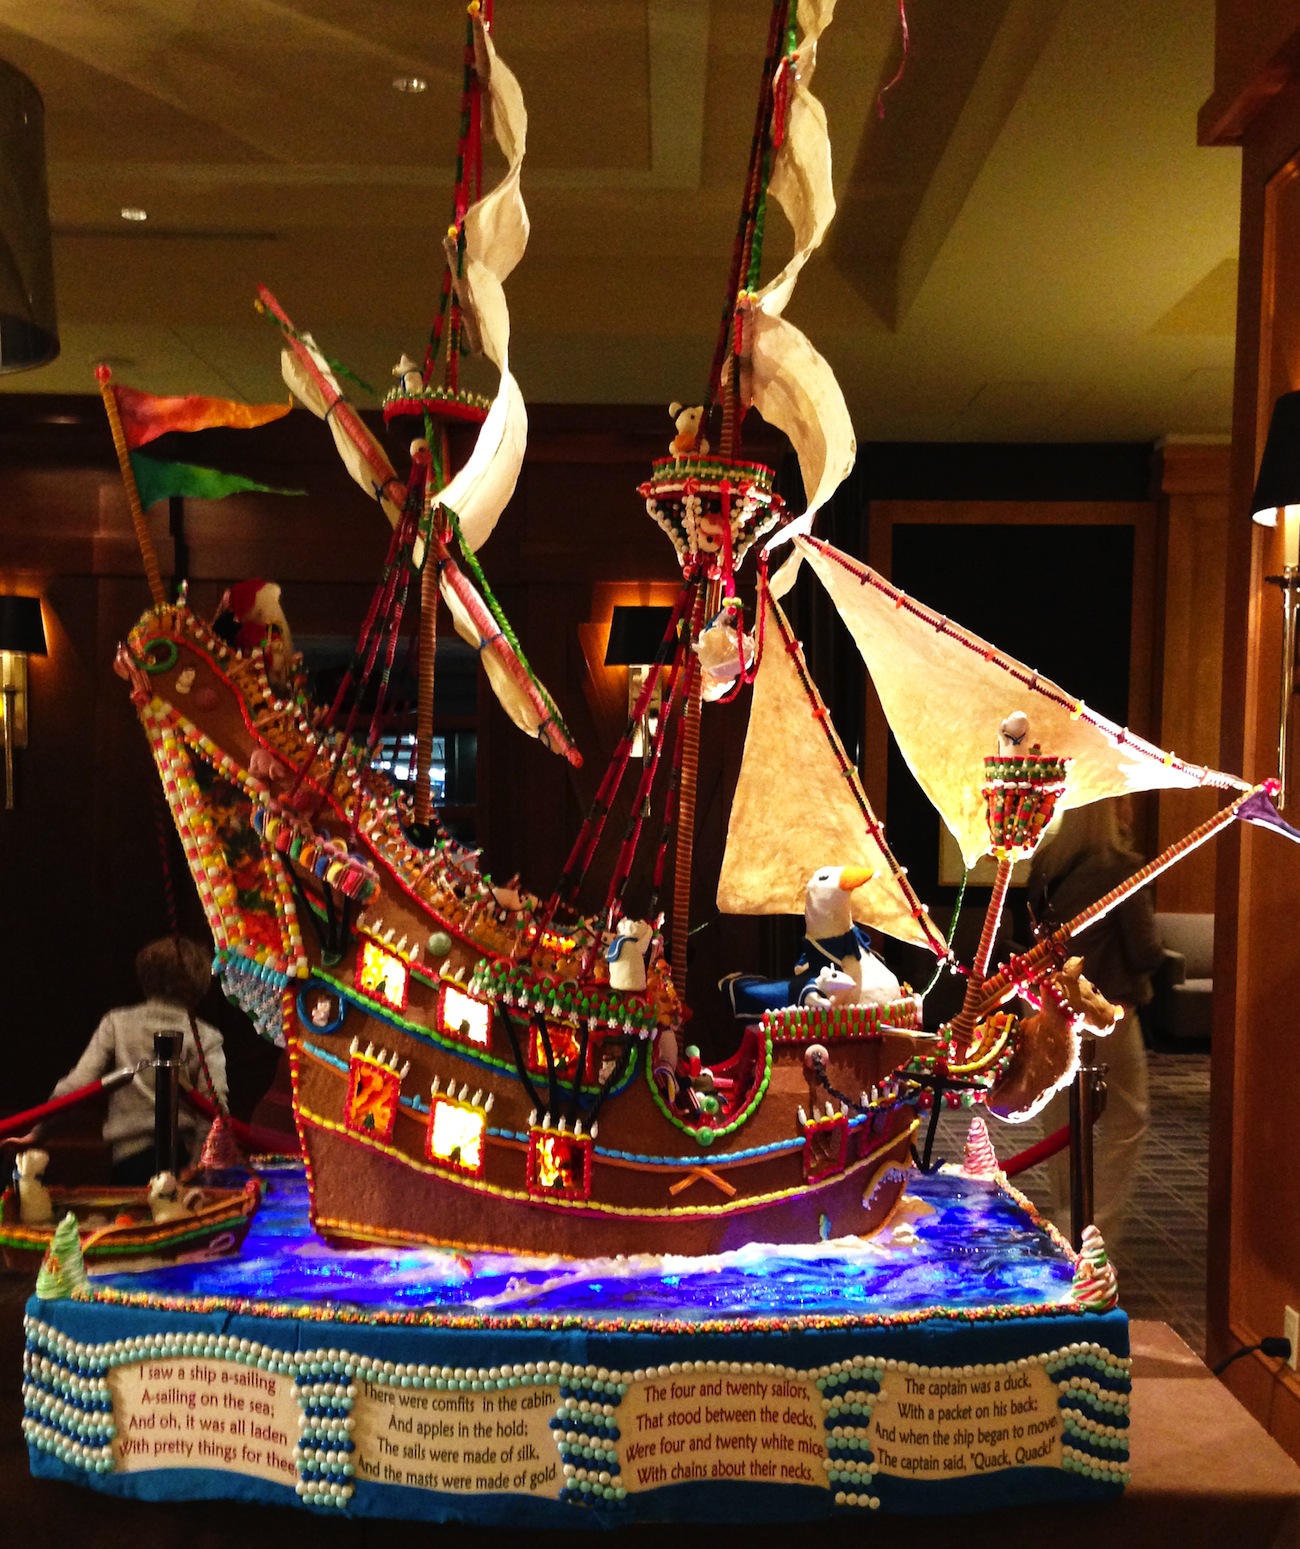 Seattle Gingerbread House I Saw a Ship a Sailing by 4D Architects